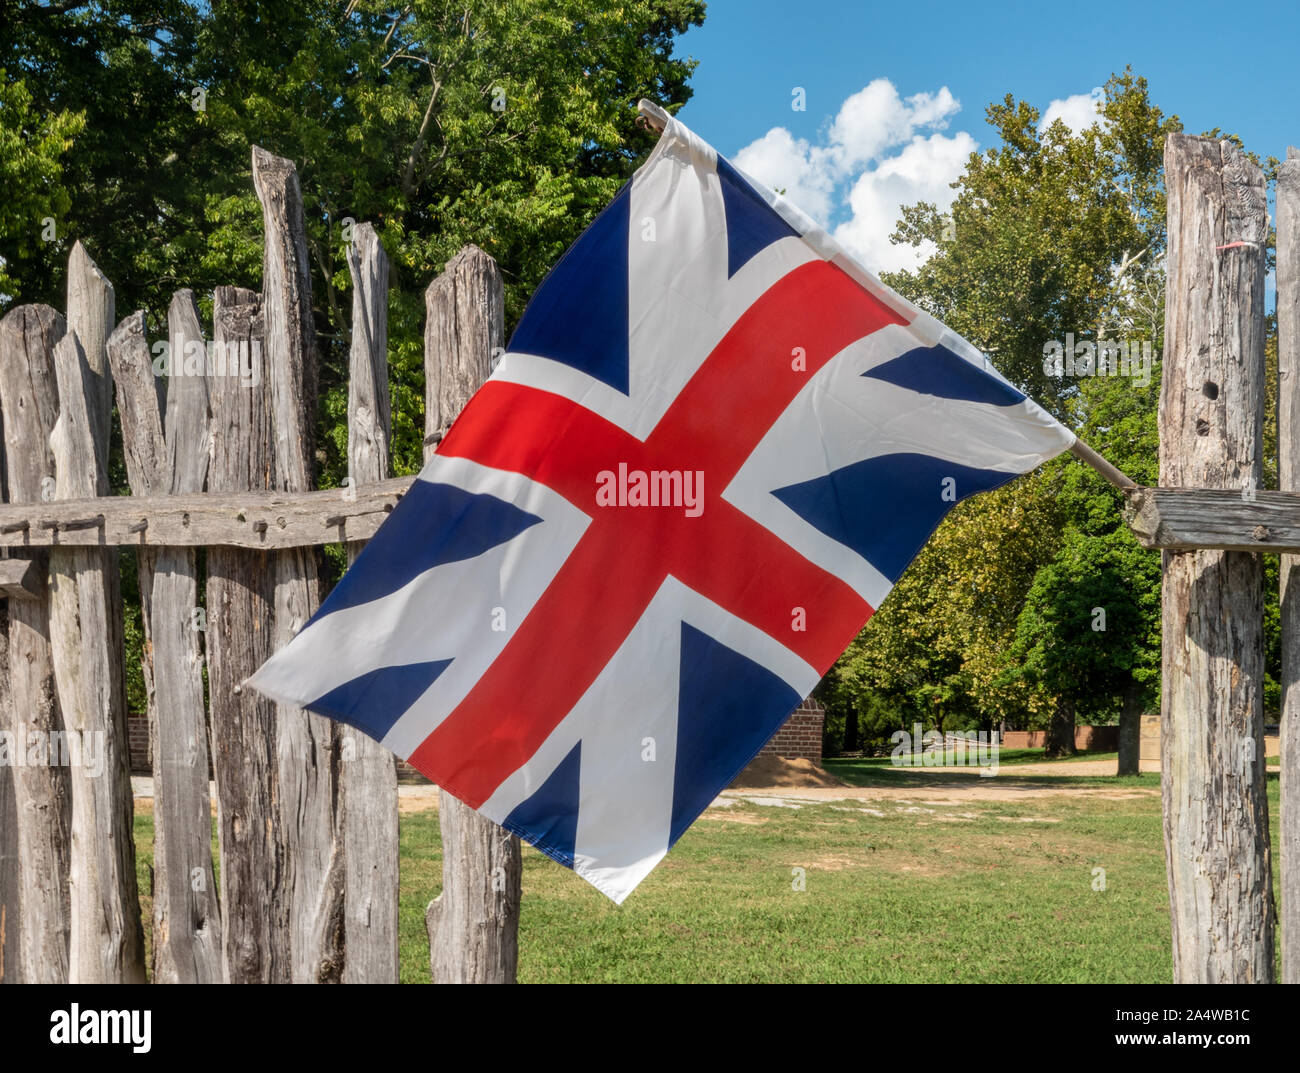 Historic union flag or jack from historic period before Ireland was added. Could be used as Brexit image for mainland Britain separate from Ireland Stock Photo